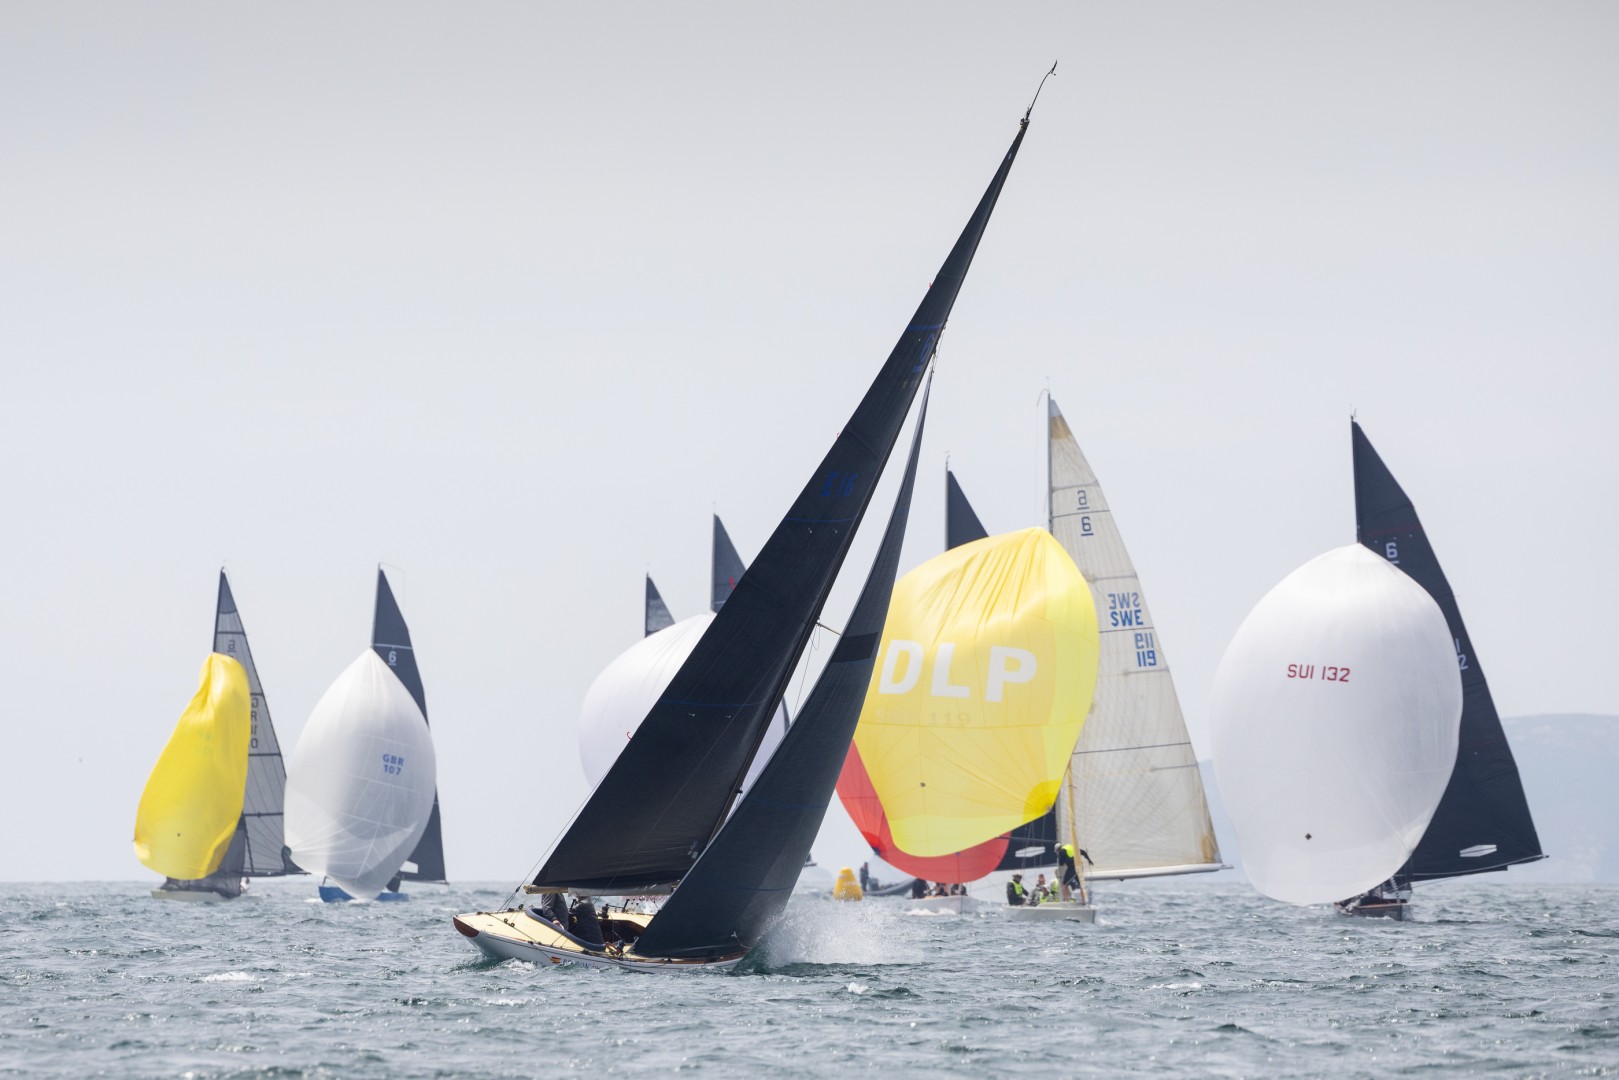 Bribon 500 and Momo dominate day one of the Xacobeo 6mR Worlds